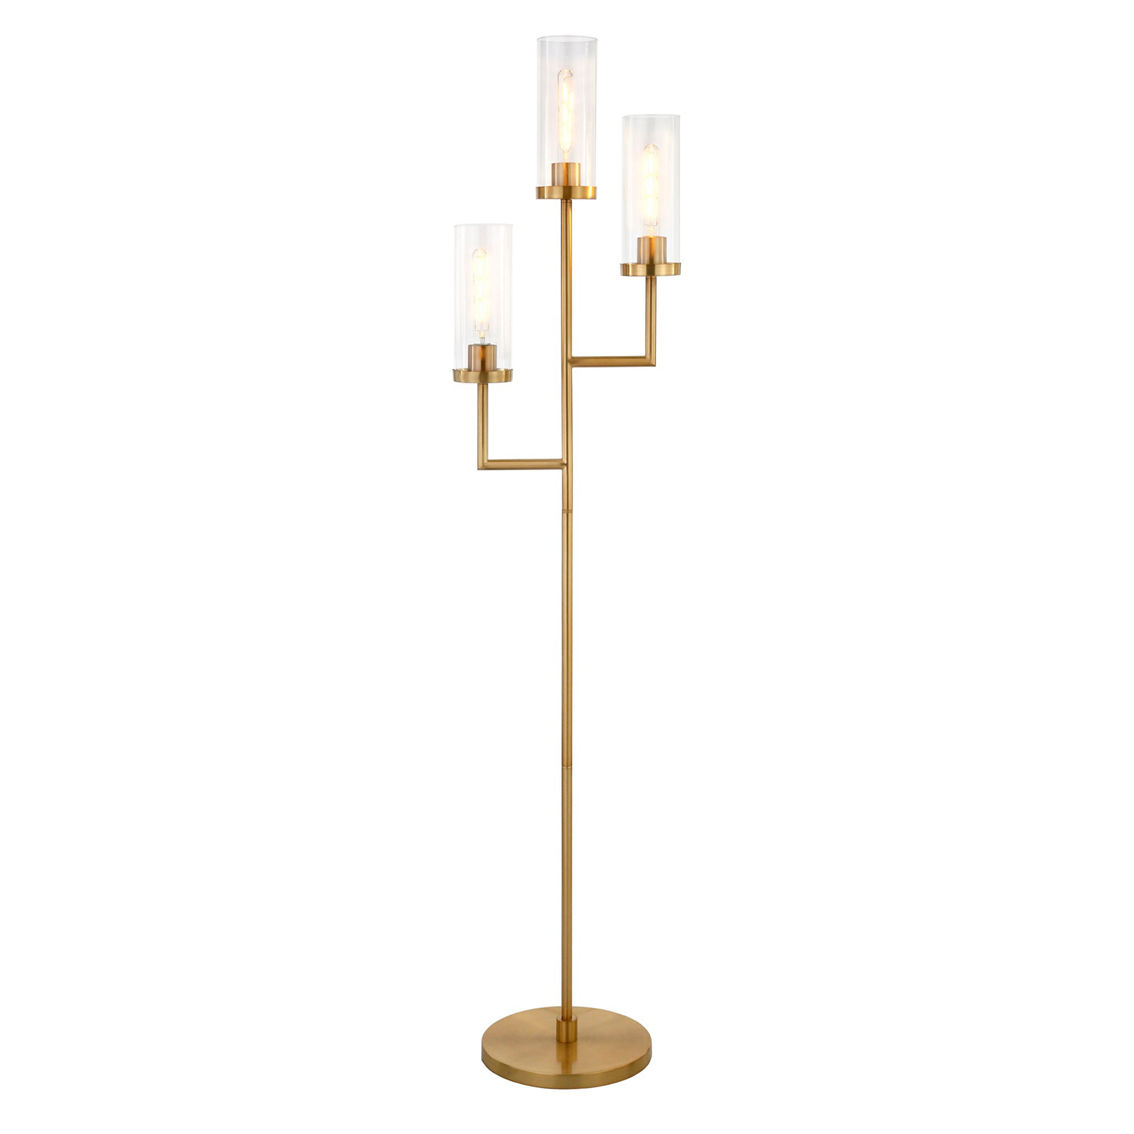 Hudson&Canal Basso 3-Light Torchiere Floor Lamp with Glass Shade - Image 3 of 5